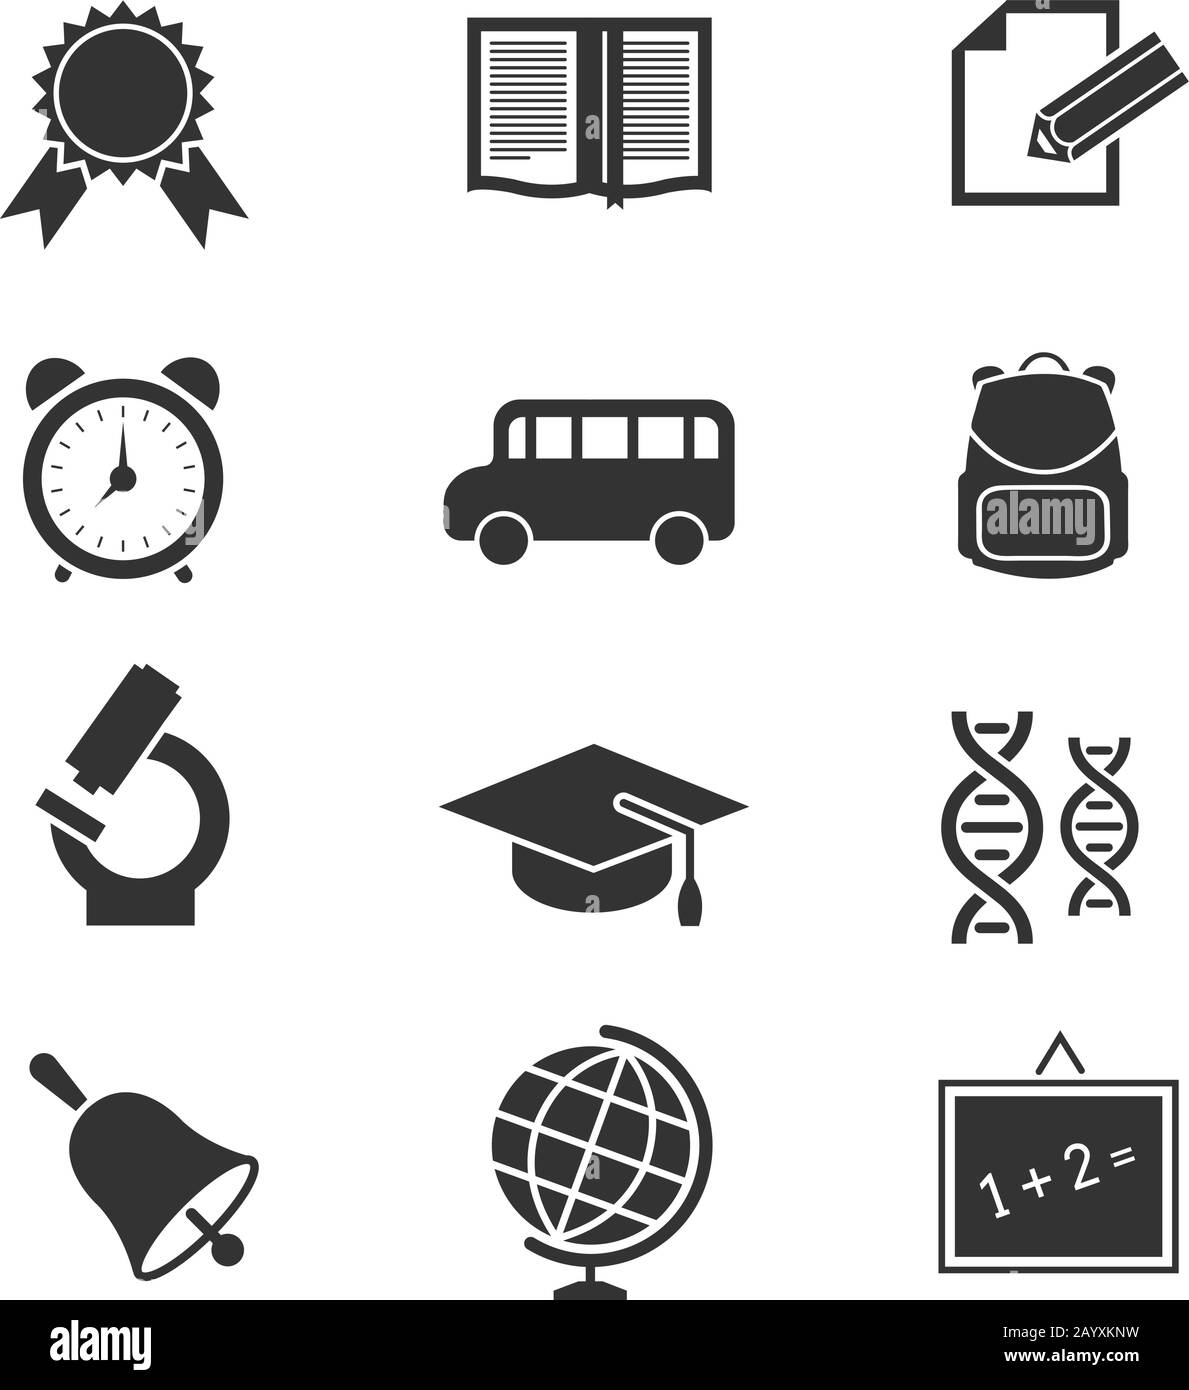 School and education vector icons. Blackboard and globe, cap and bell illustration Stock Vector